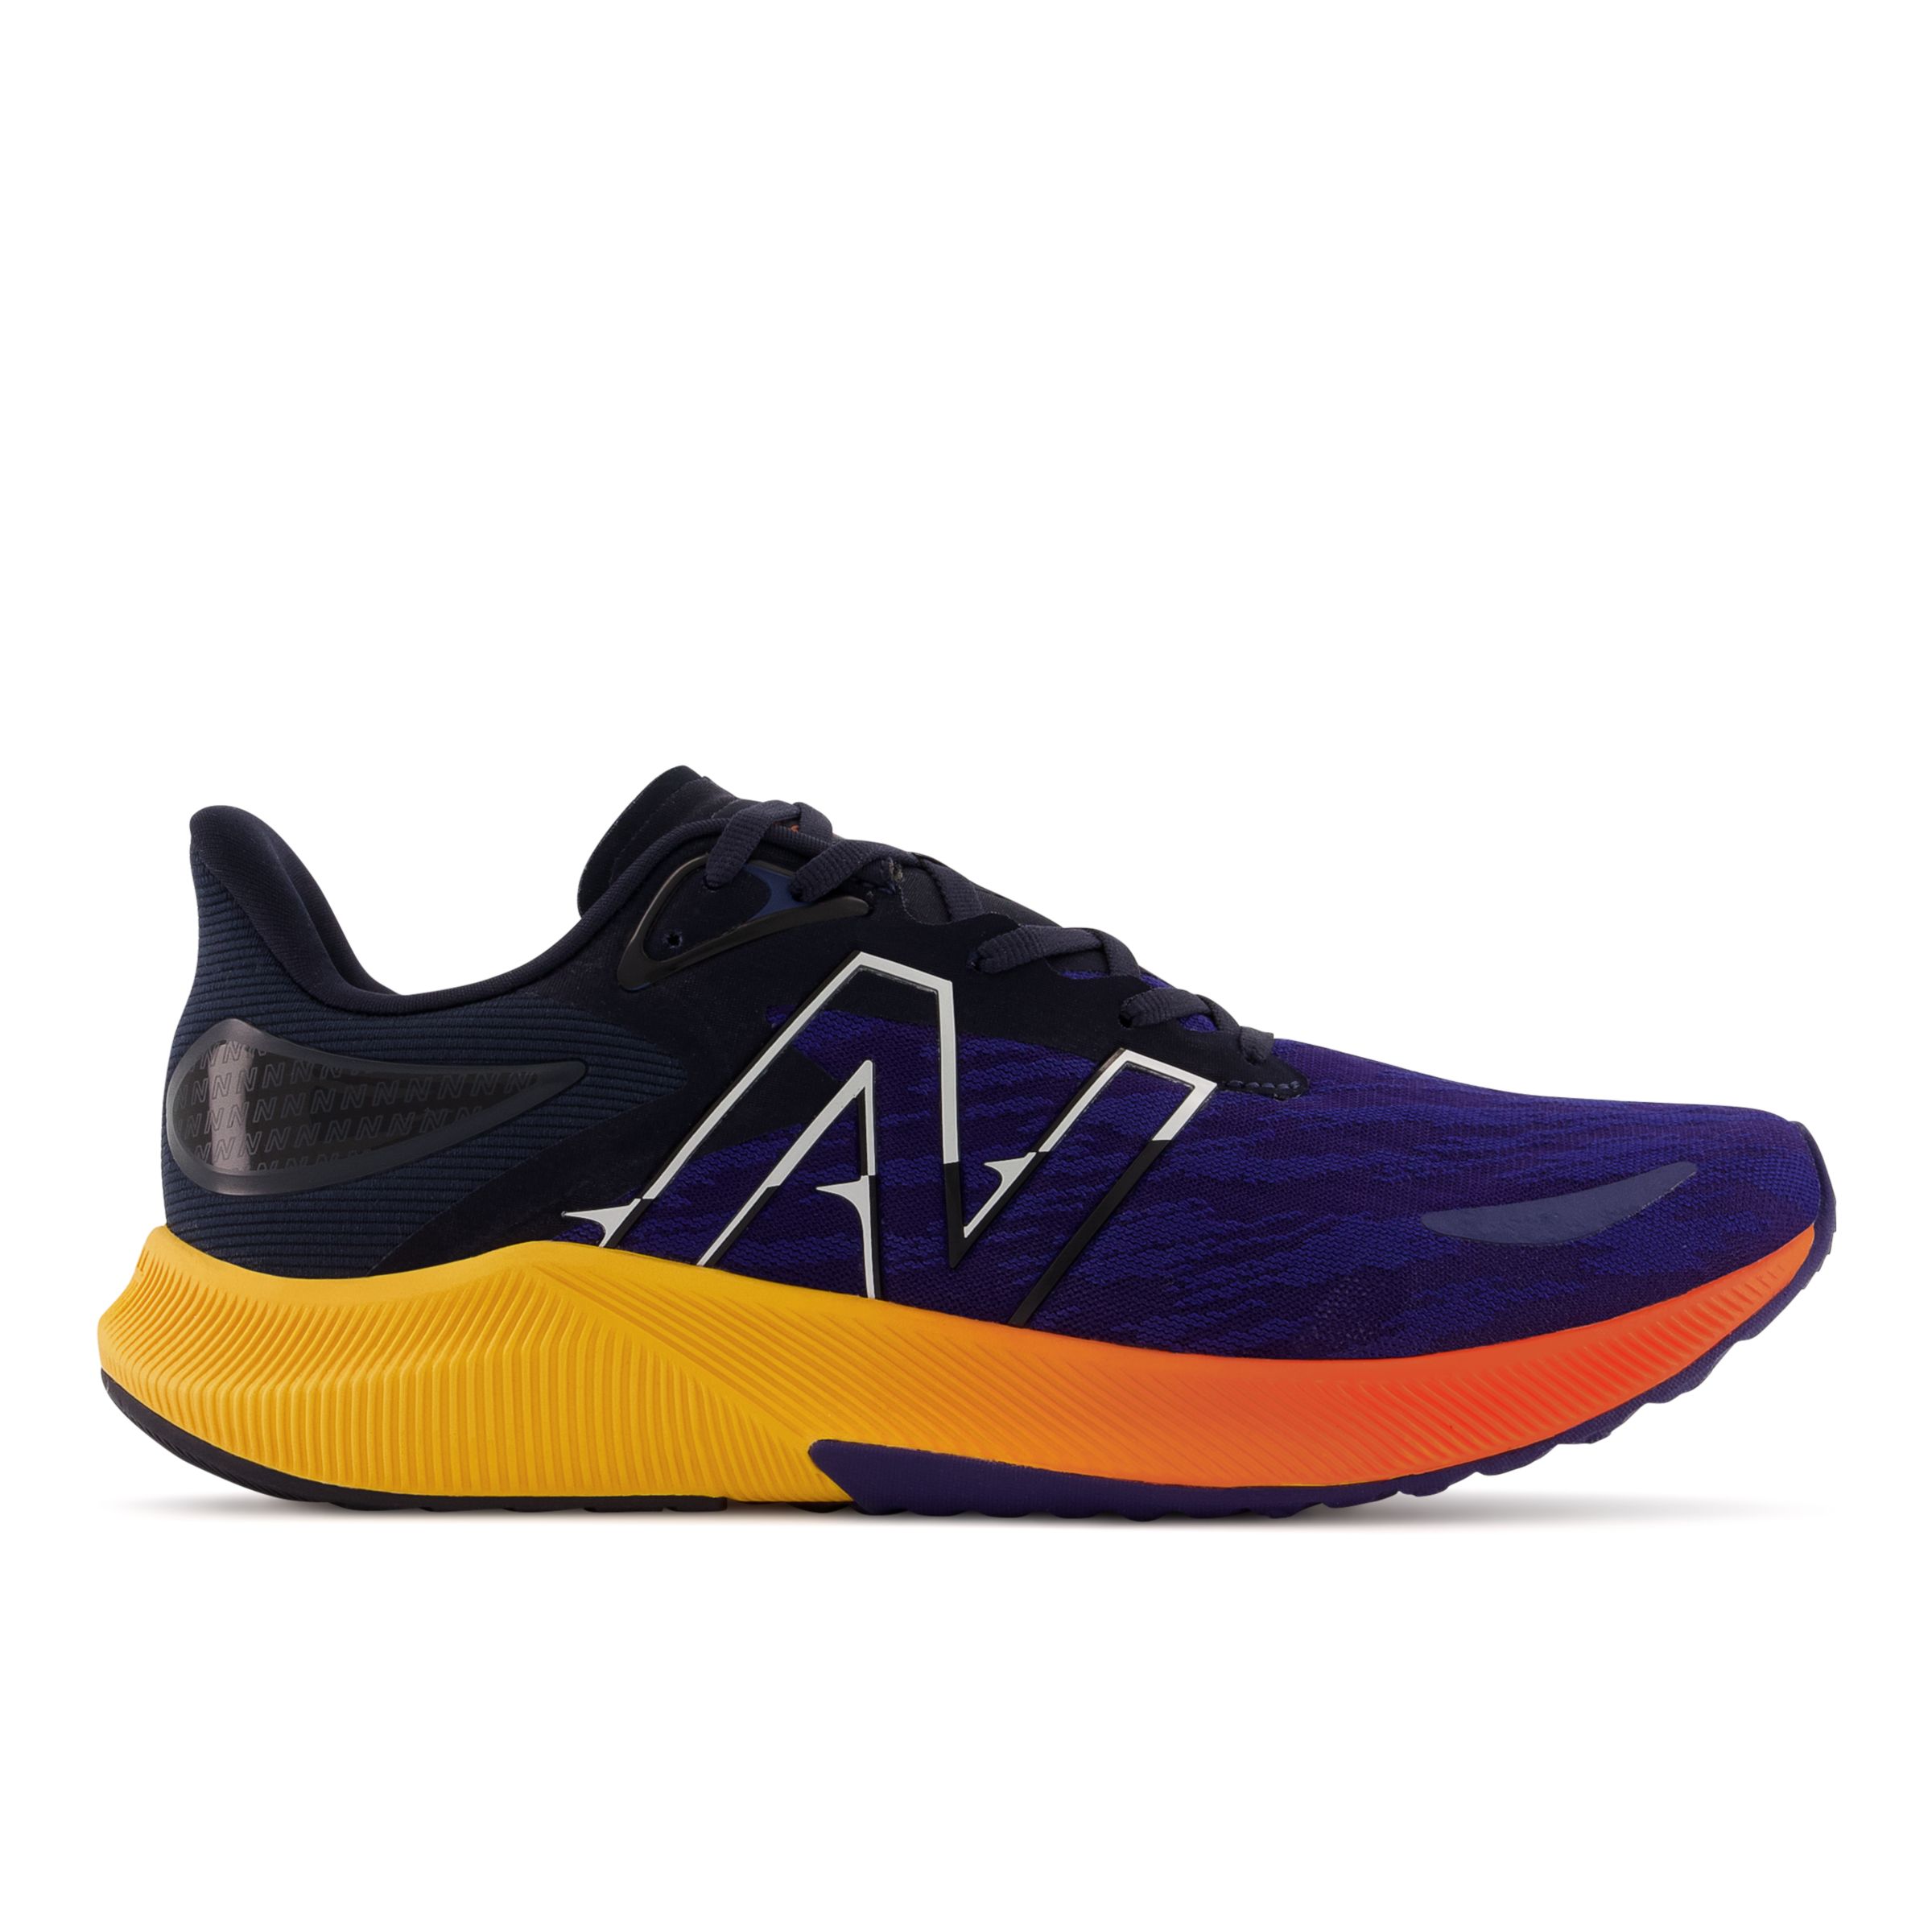 New Balance Homme FuelCell Propel v3 en Bleu/Jaune, Synthetic, Taille 45.5 Large